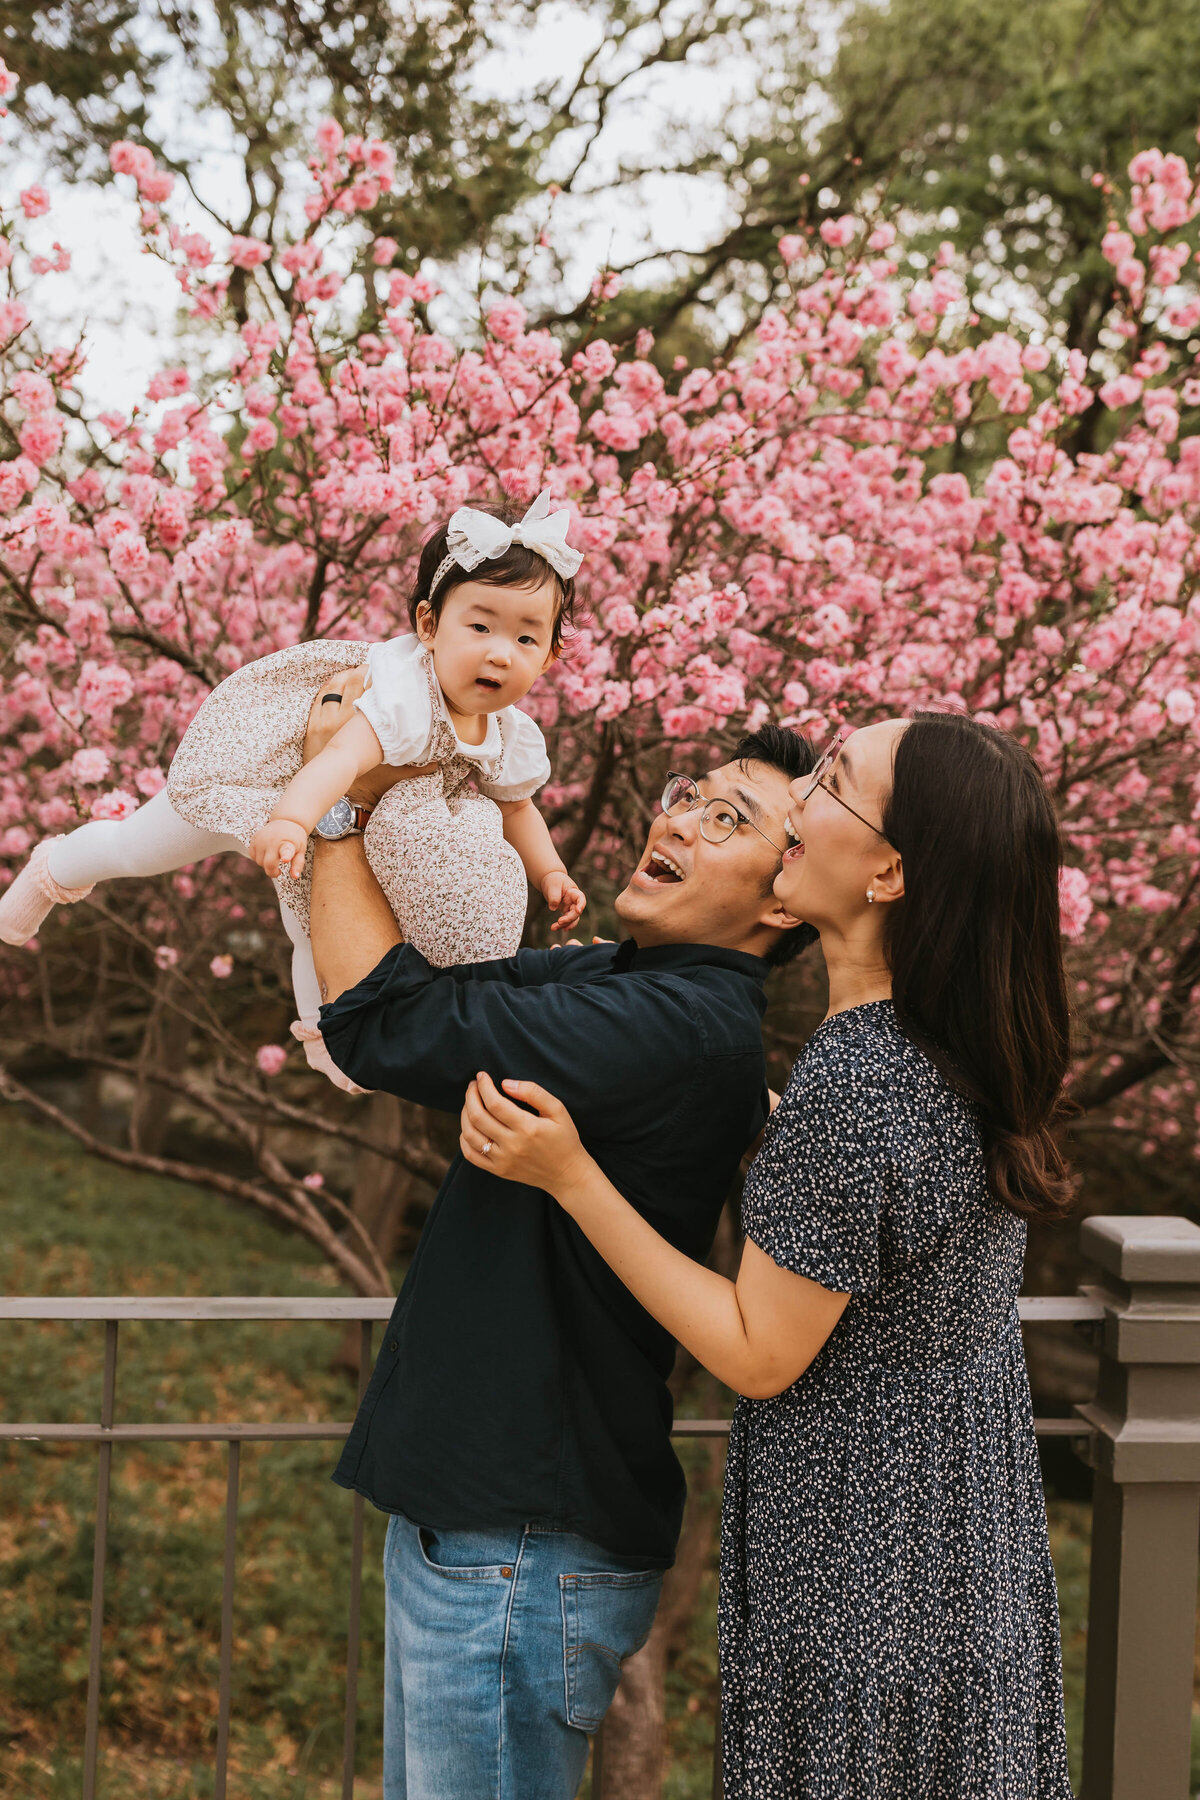 father holds daughter up in the air while mom watches with delight in front of the cherry blossom trees